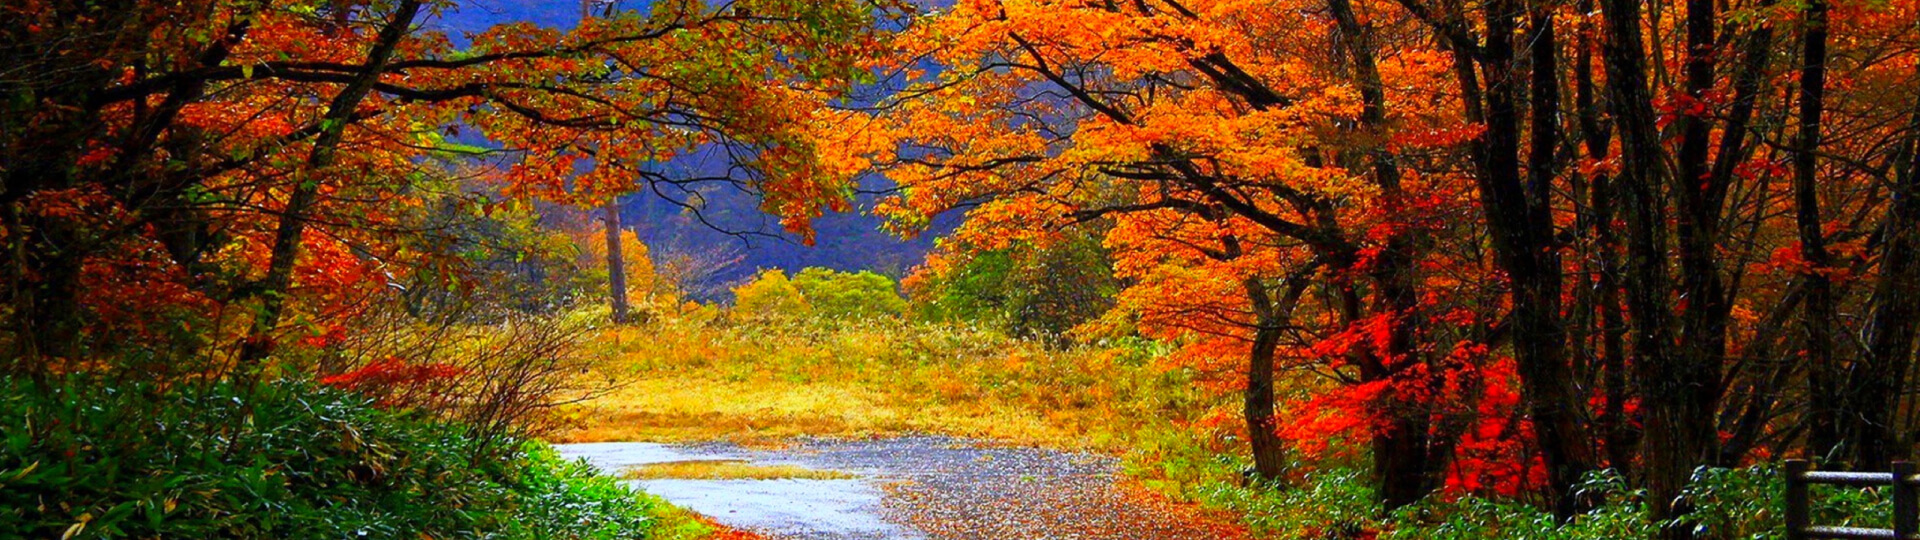 The beautiful colors of the autumn months